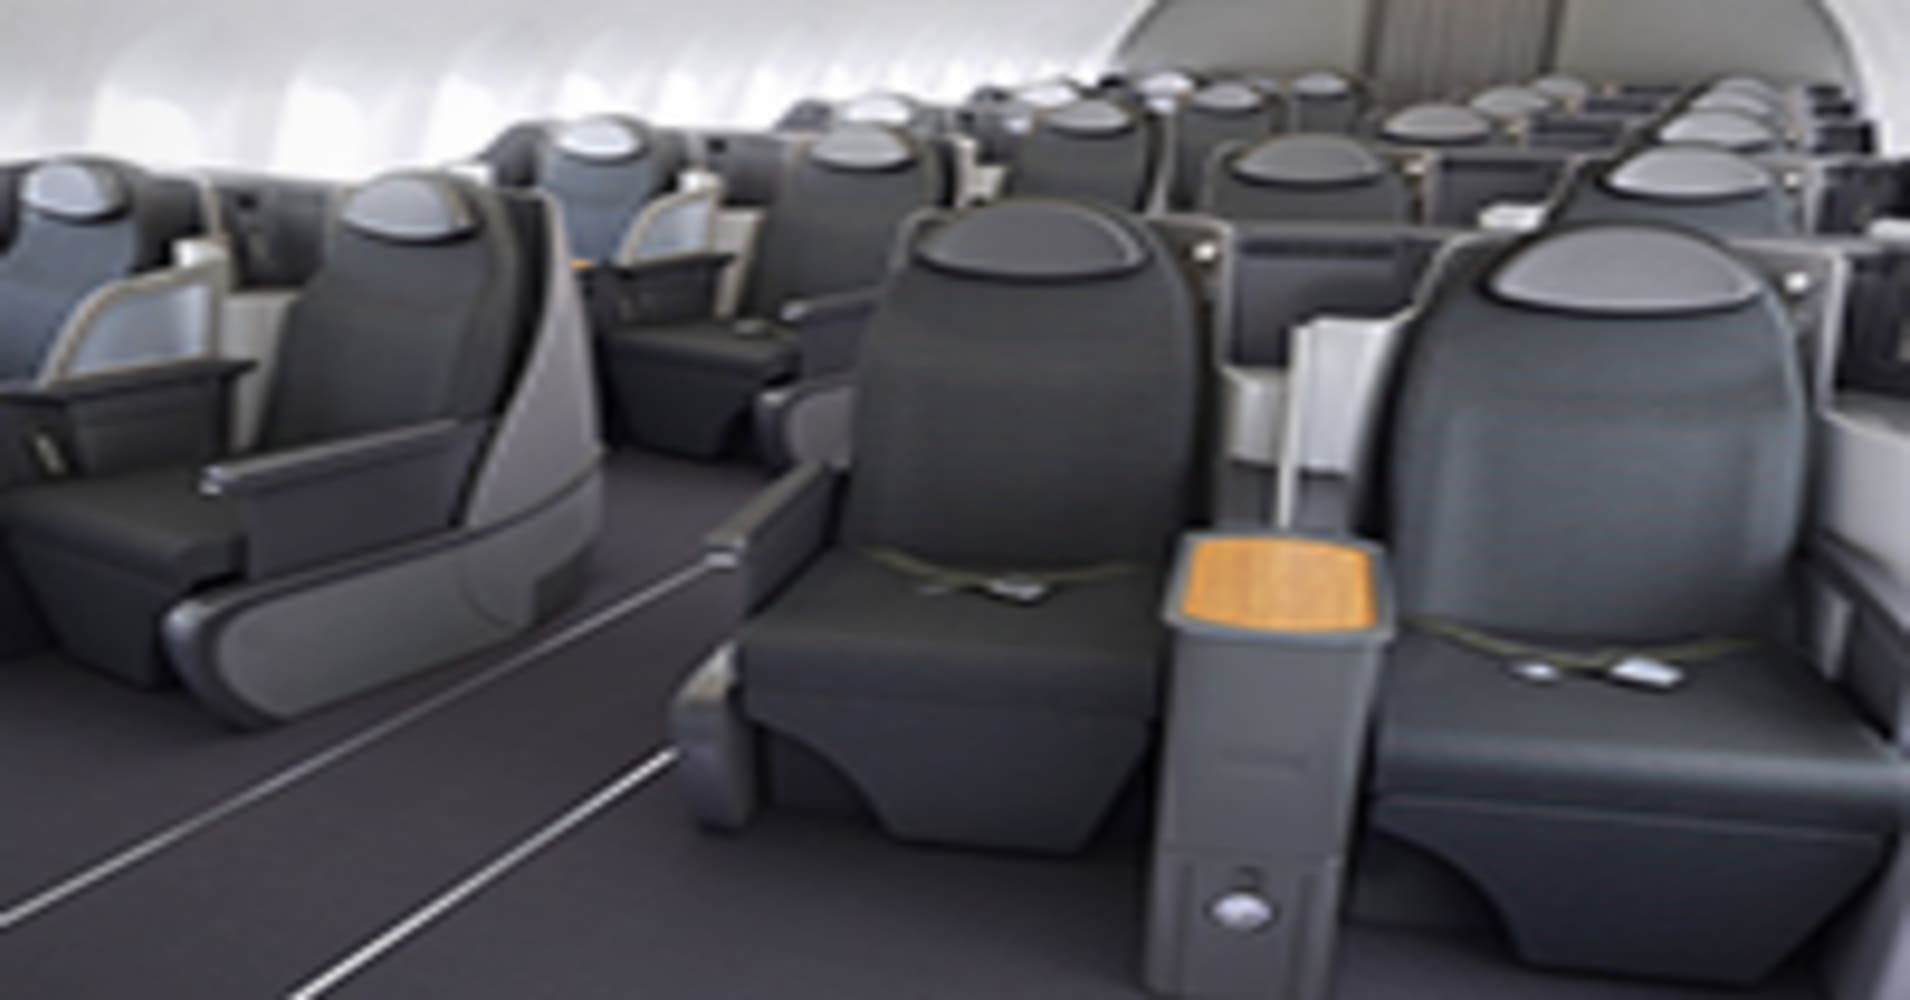 American To Offer More Fully Flat Seating